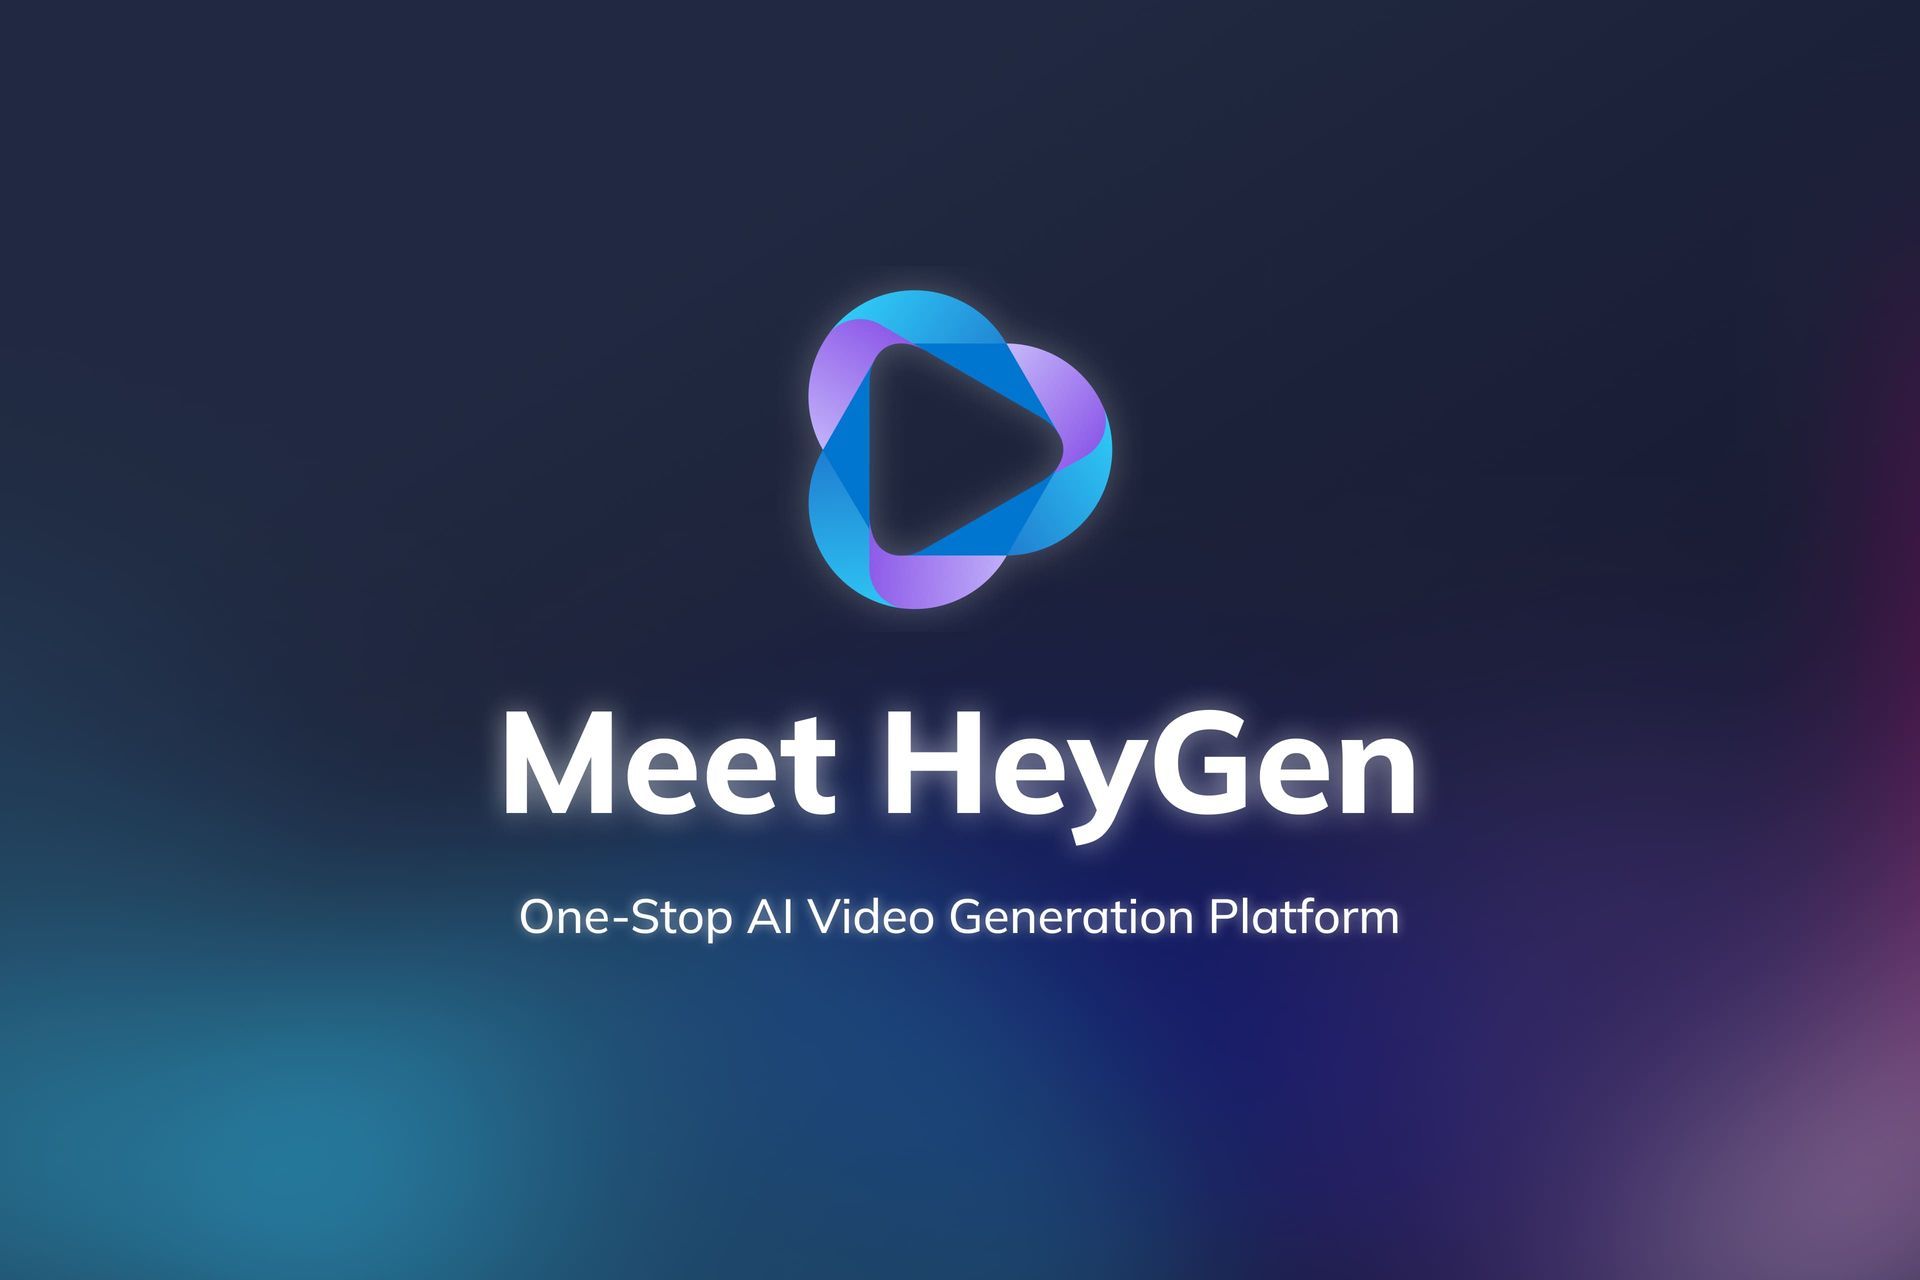 Multilingual content creation is now possible with HeyGen AI's 13-language video translator, including Mandarin, English, and Spanish!